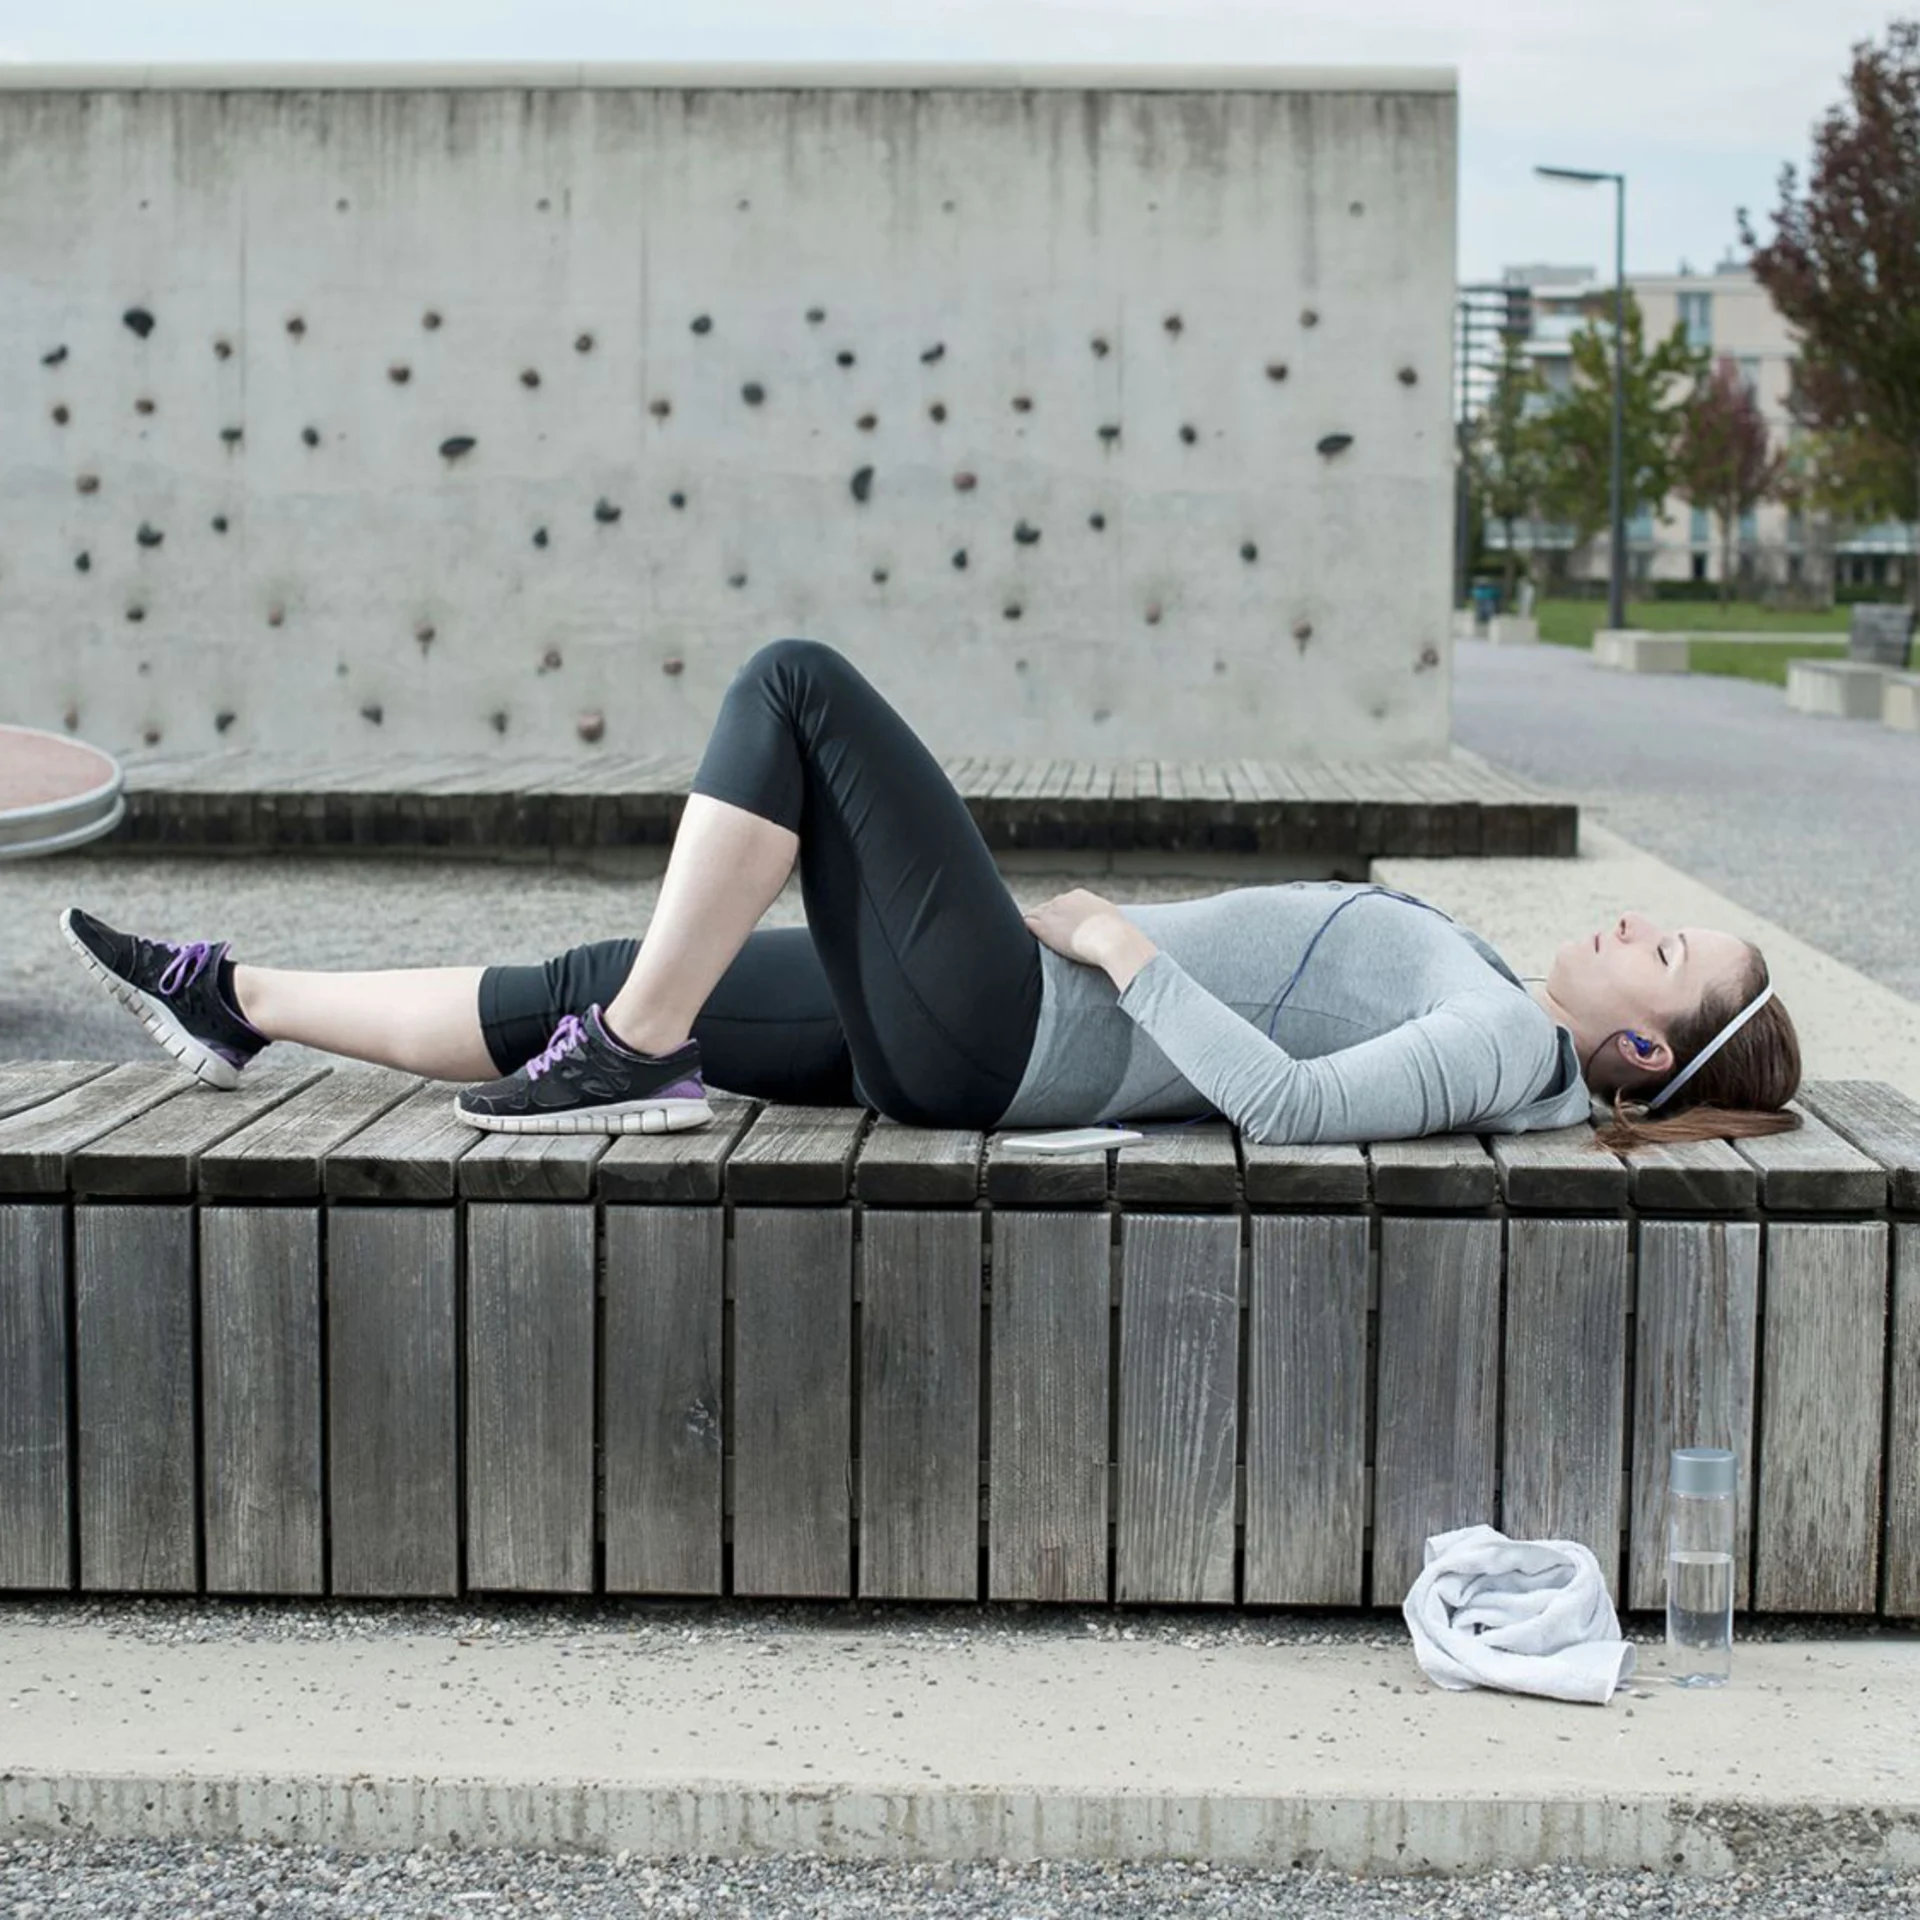 A woman lies on a bench after exercising